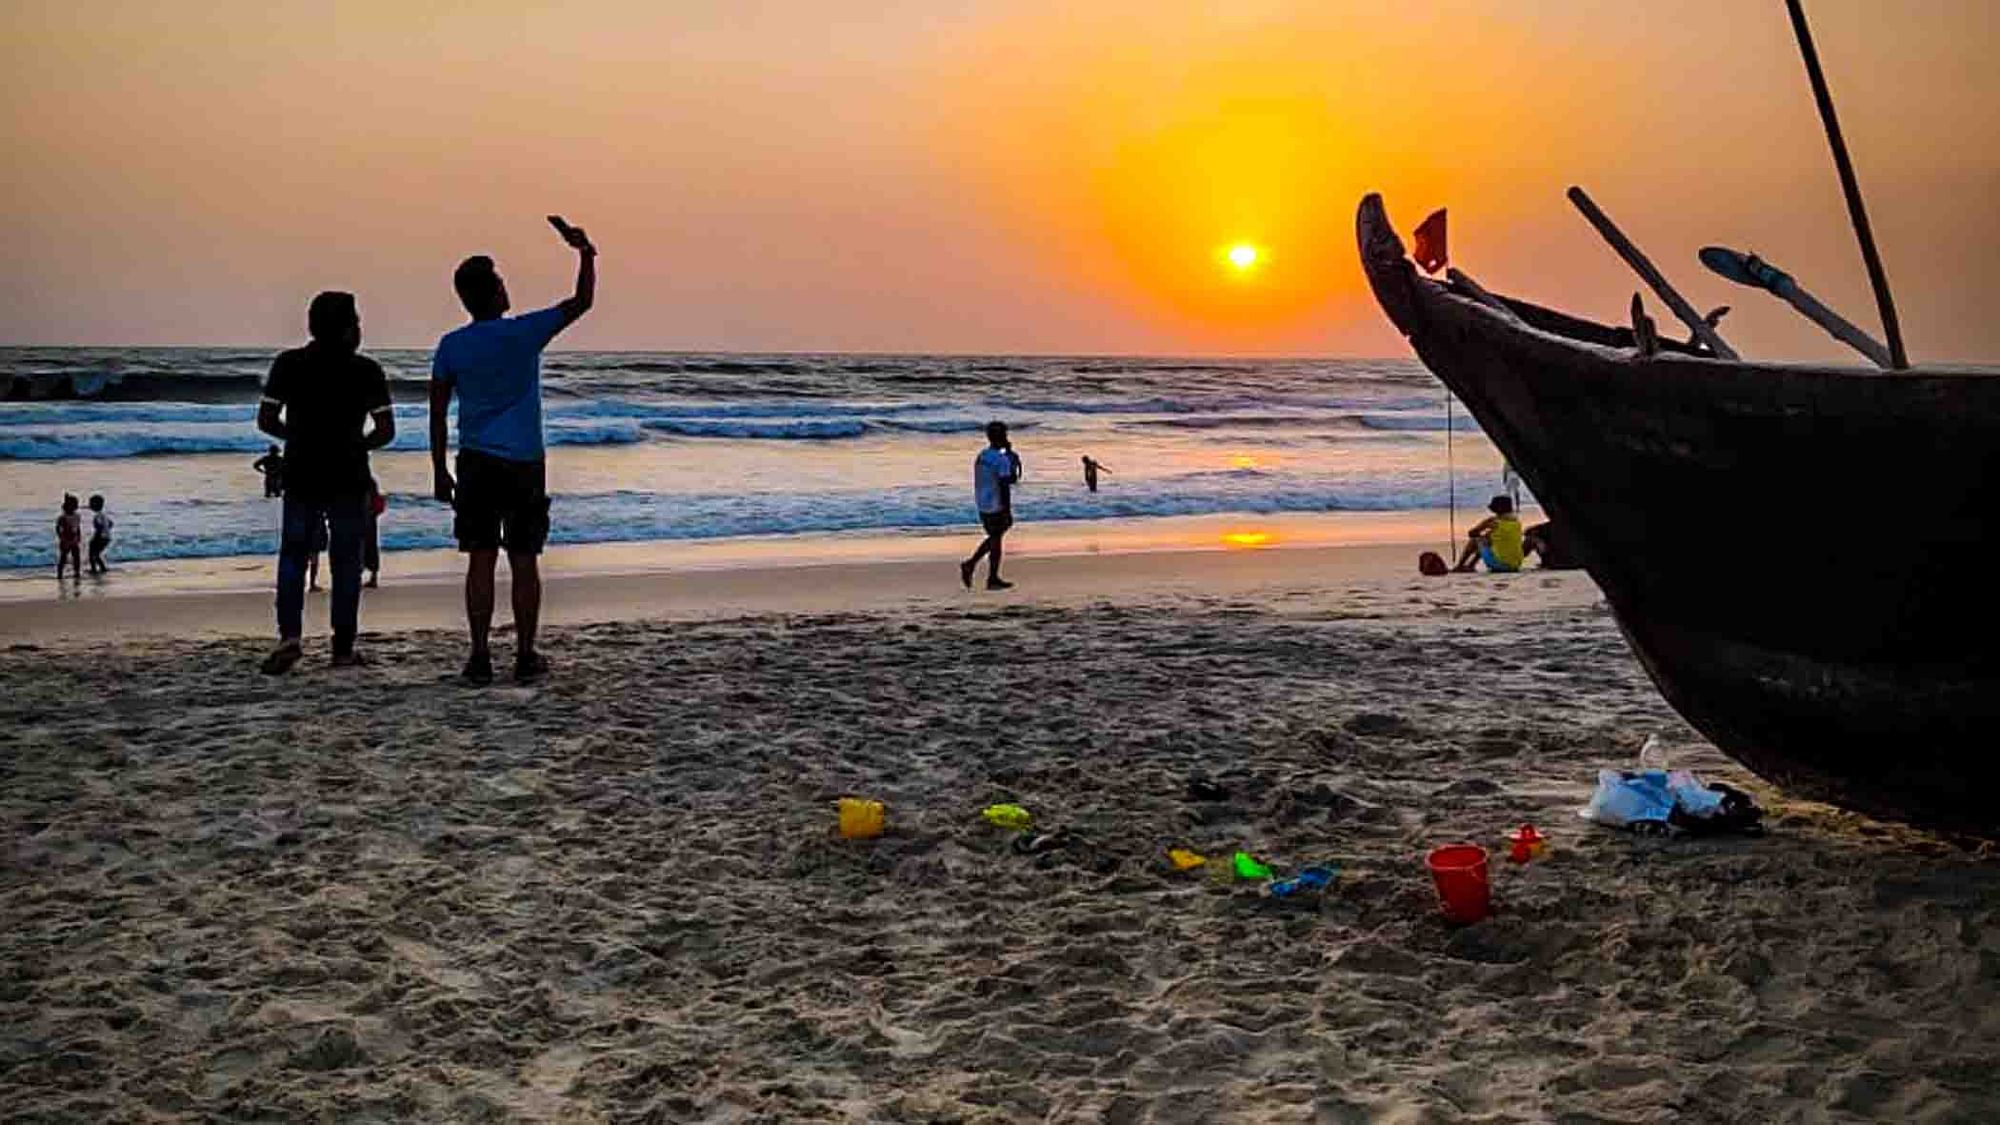 Tourists at a Goa beach. Image used for representational purposes.